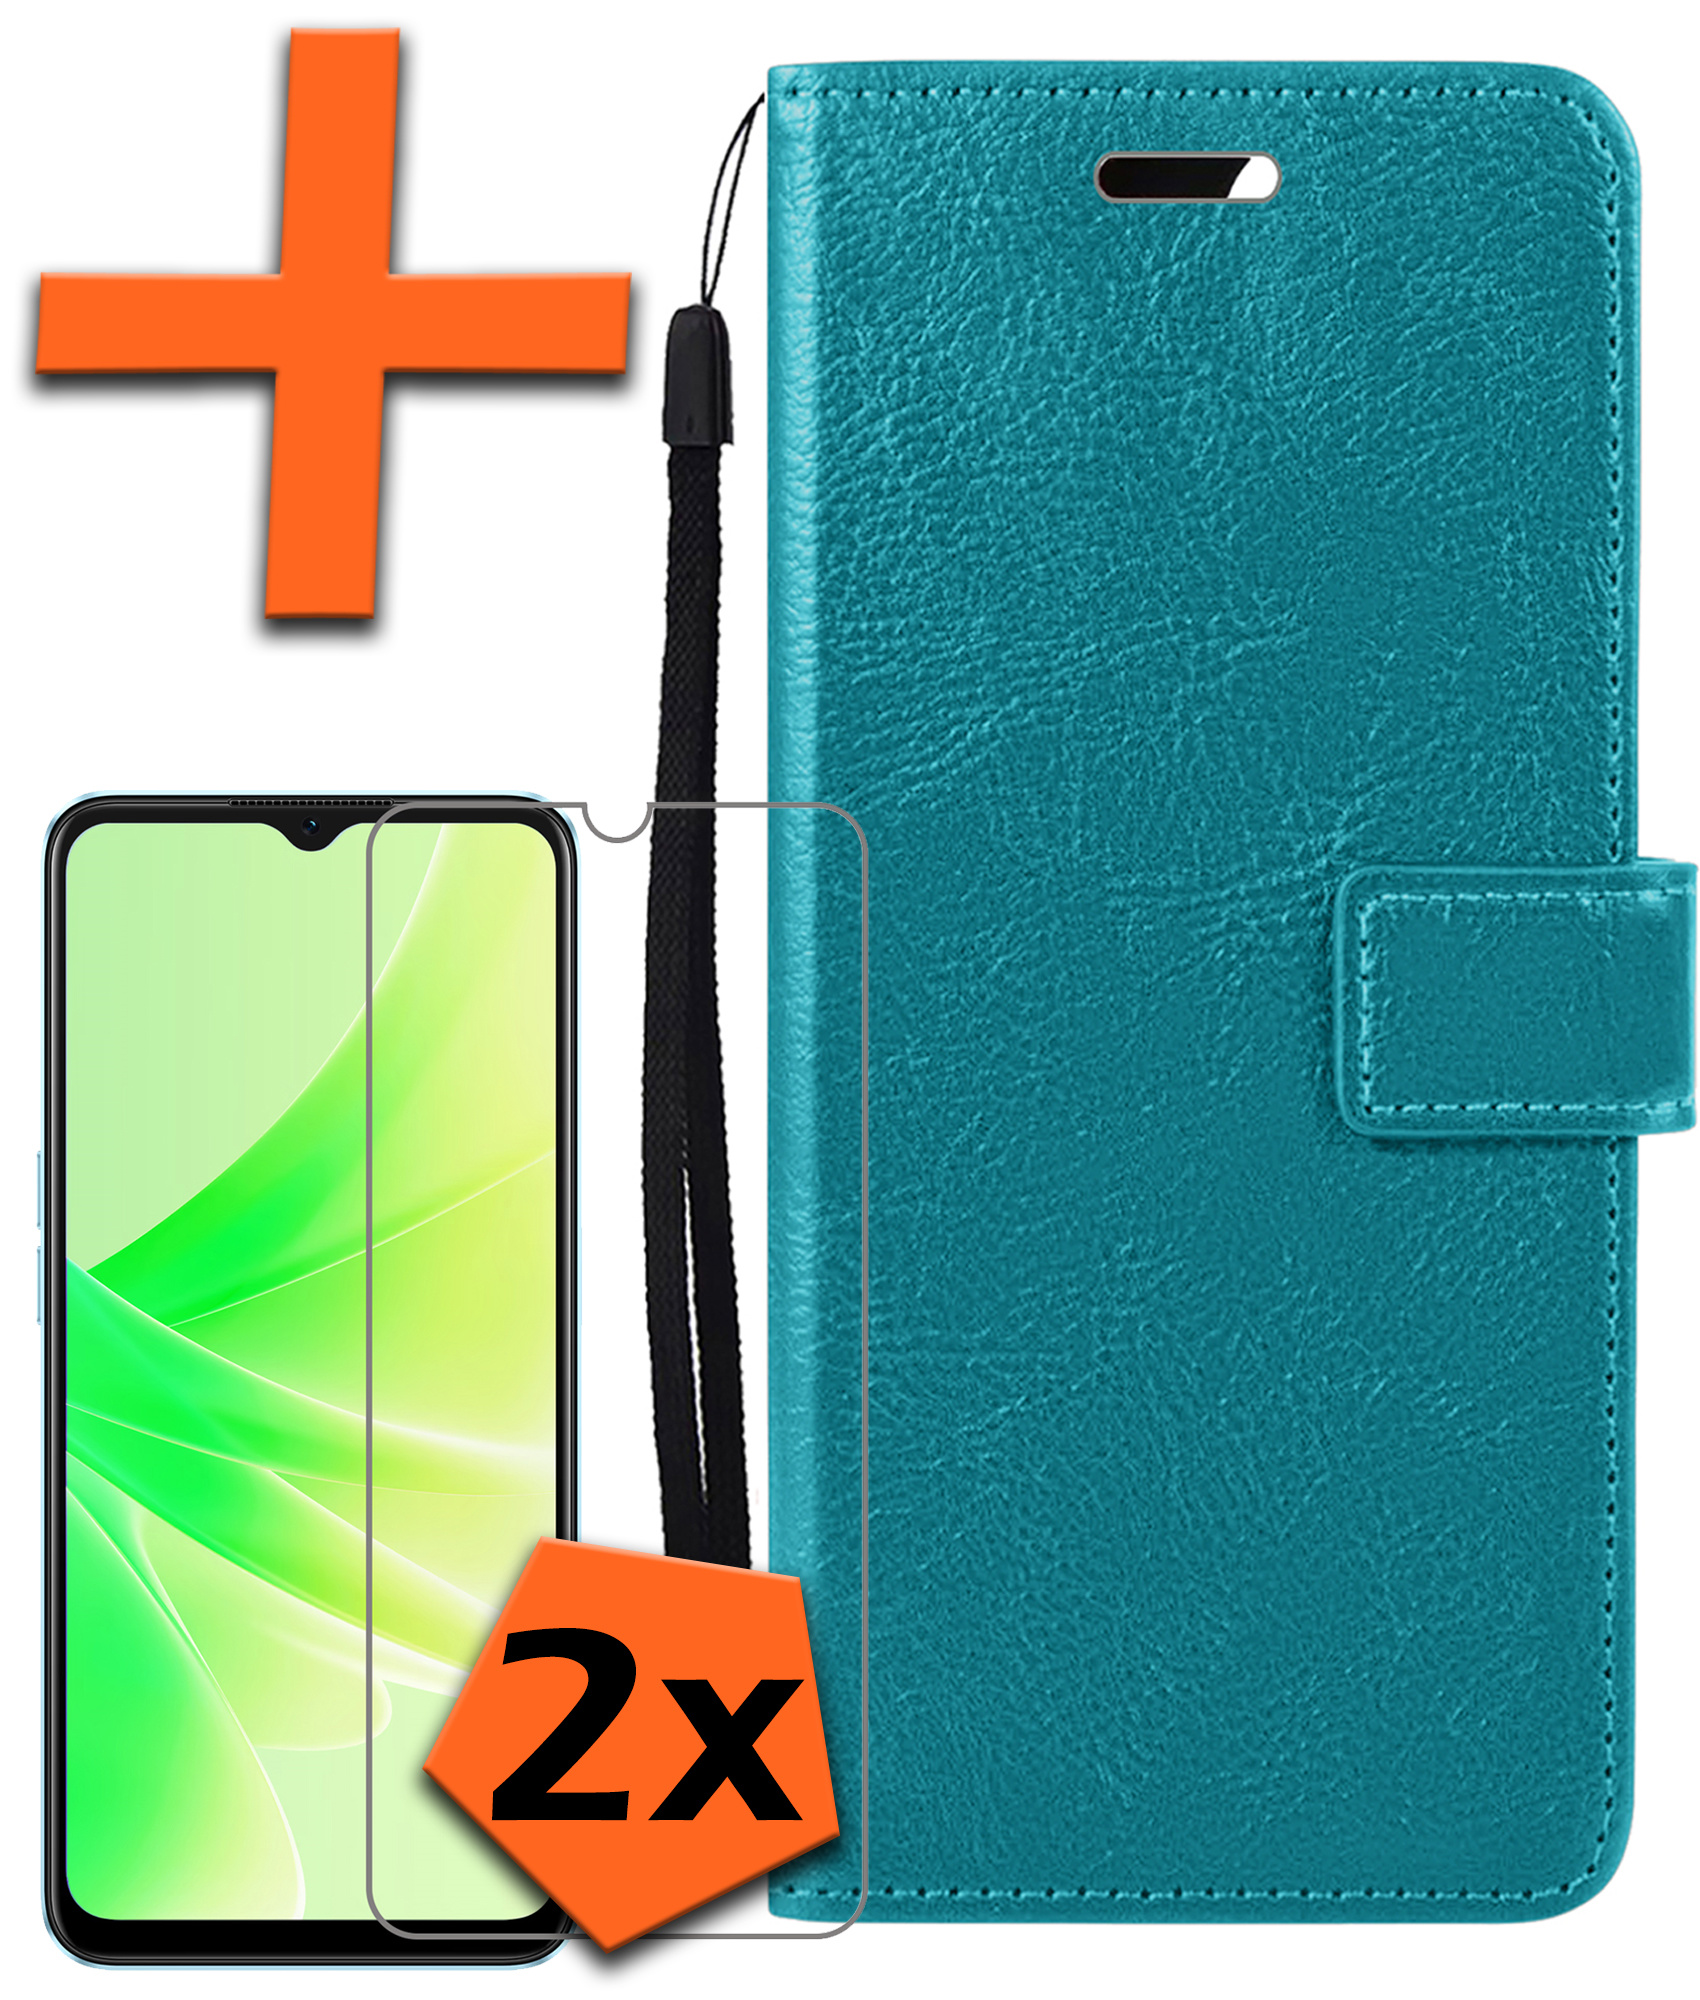 OPPO A17 Hoes Bookcase Flipcase Book Cover Met 2x Screenprotector - OPPO A17 Hoesje Book Case - Turquoise